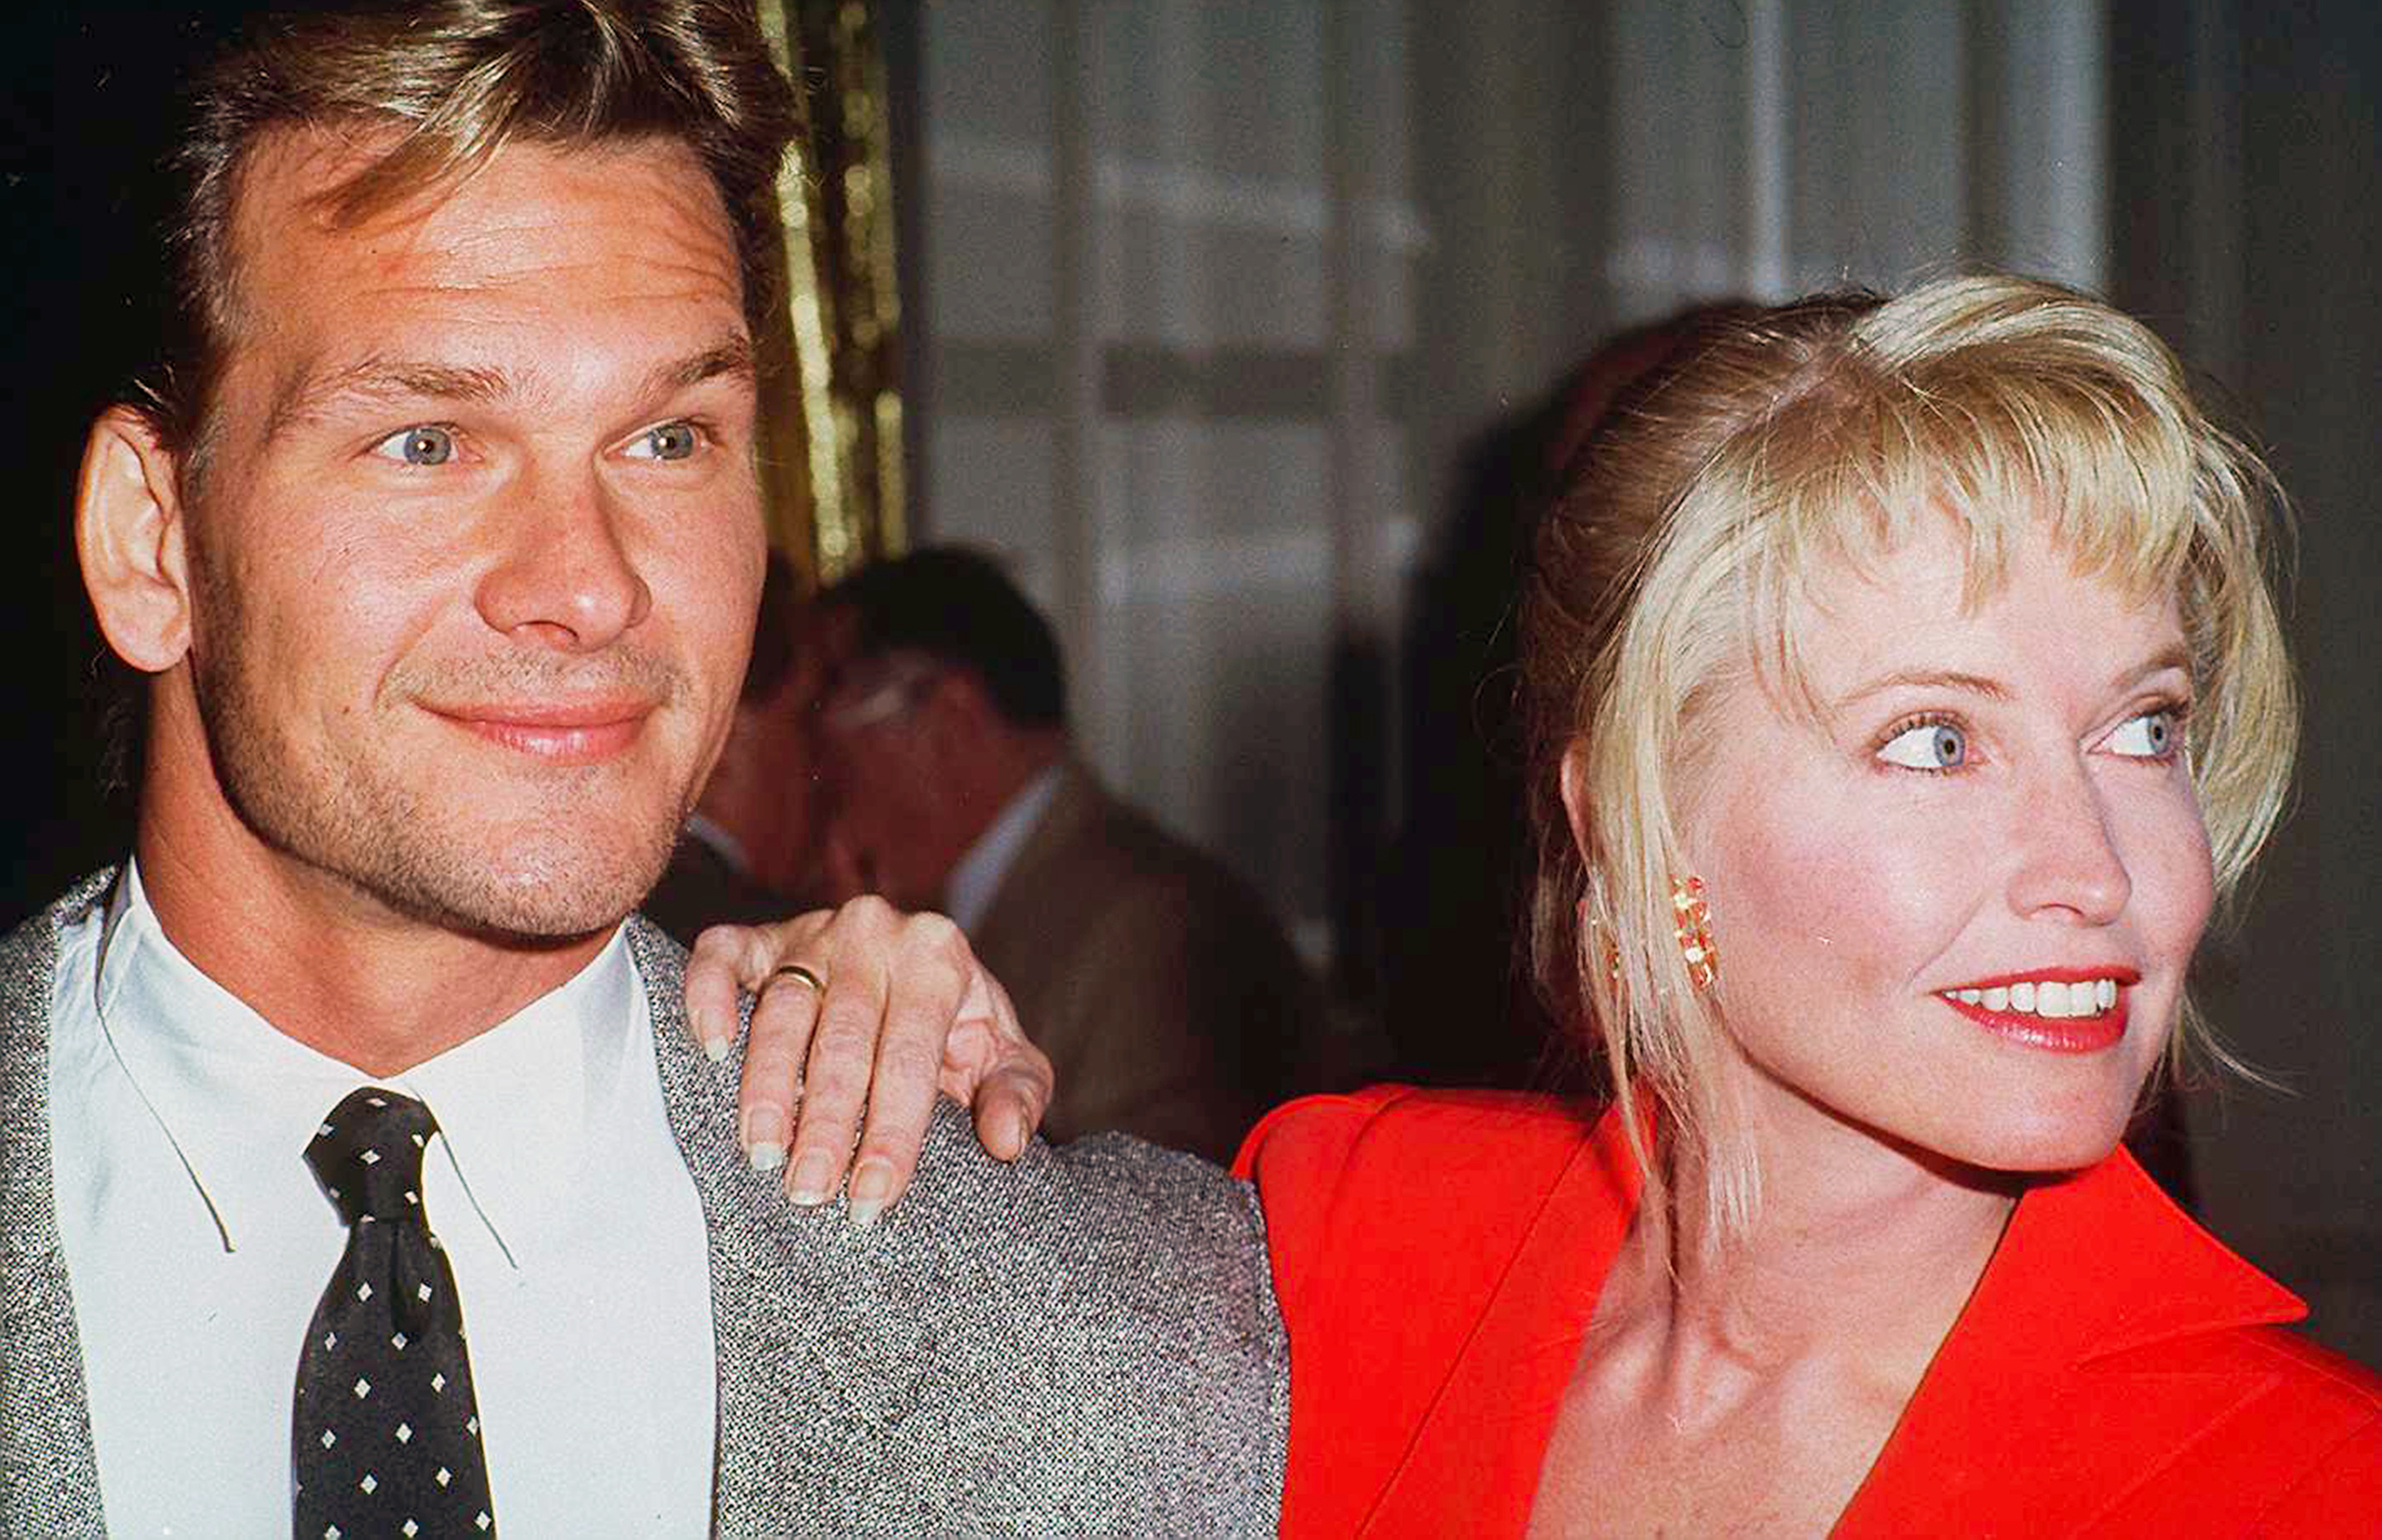 Patrick Swayze and his wife Lisa Niemi photographed in 1990 | Source: Getty Images